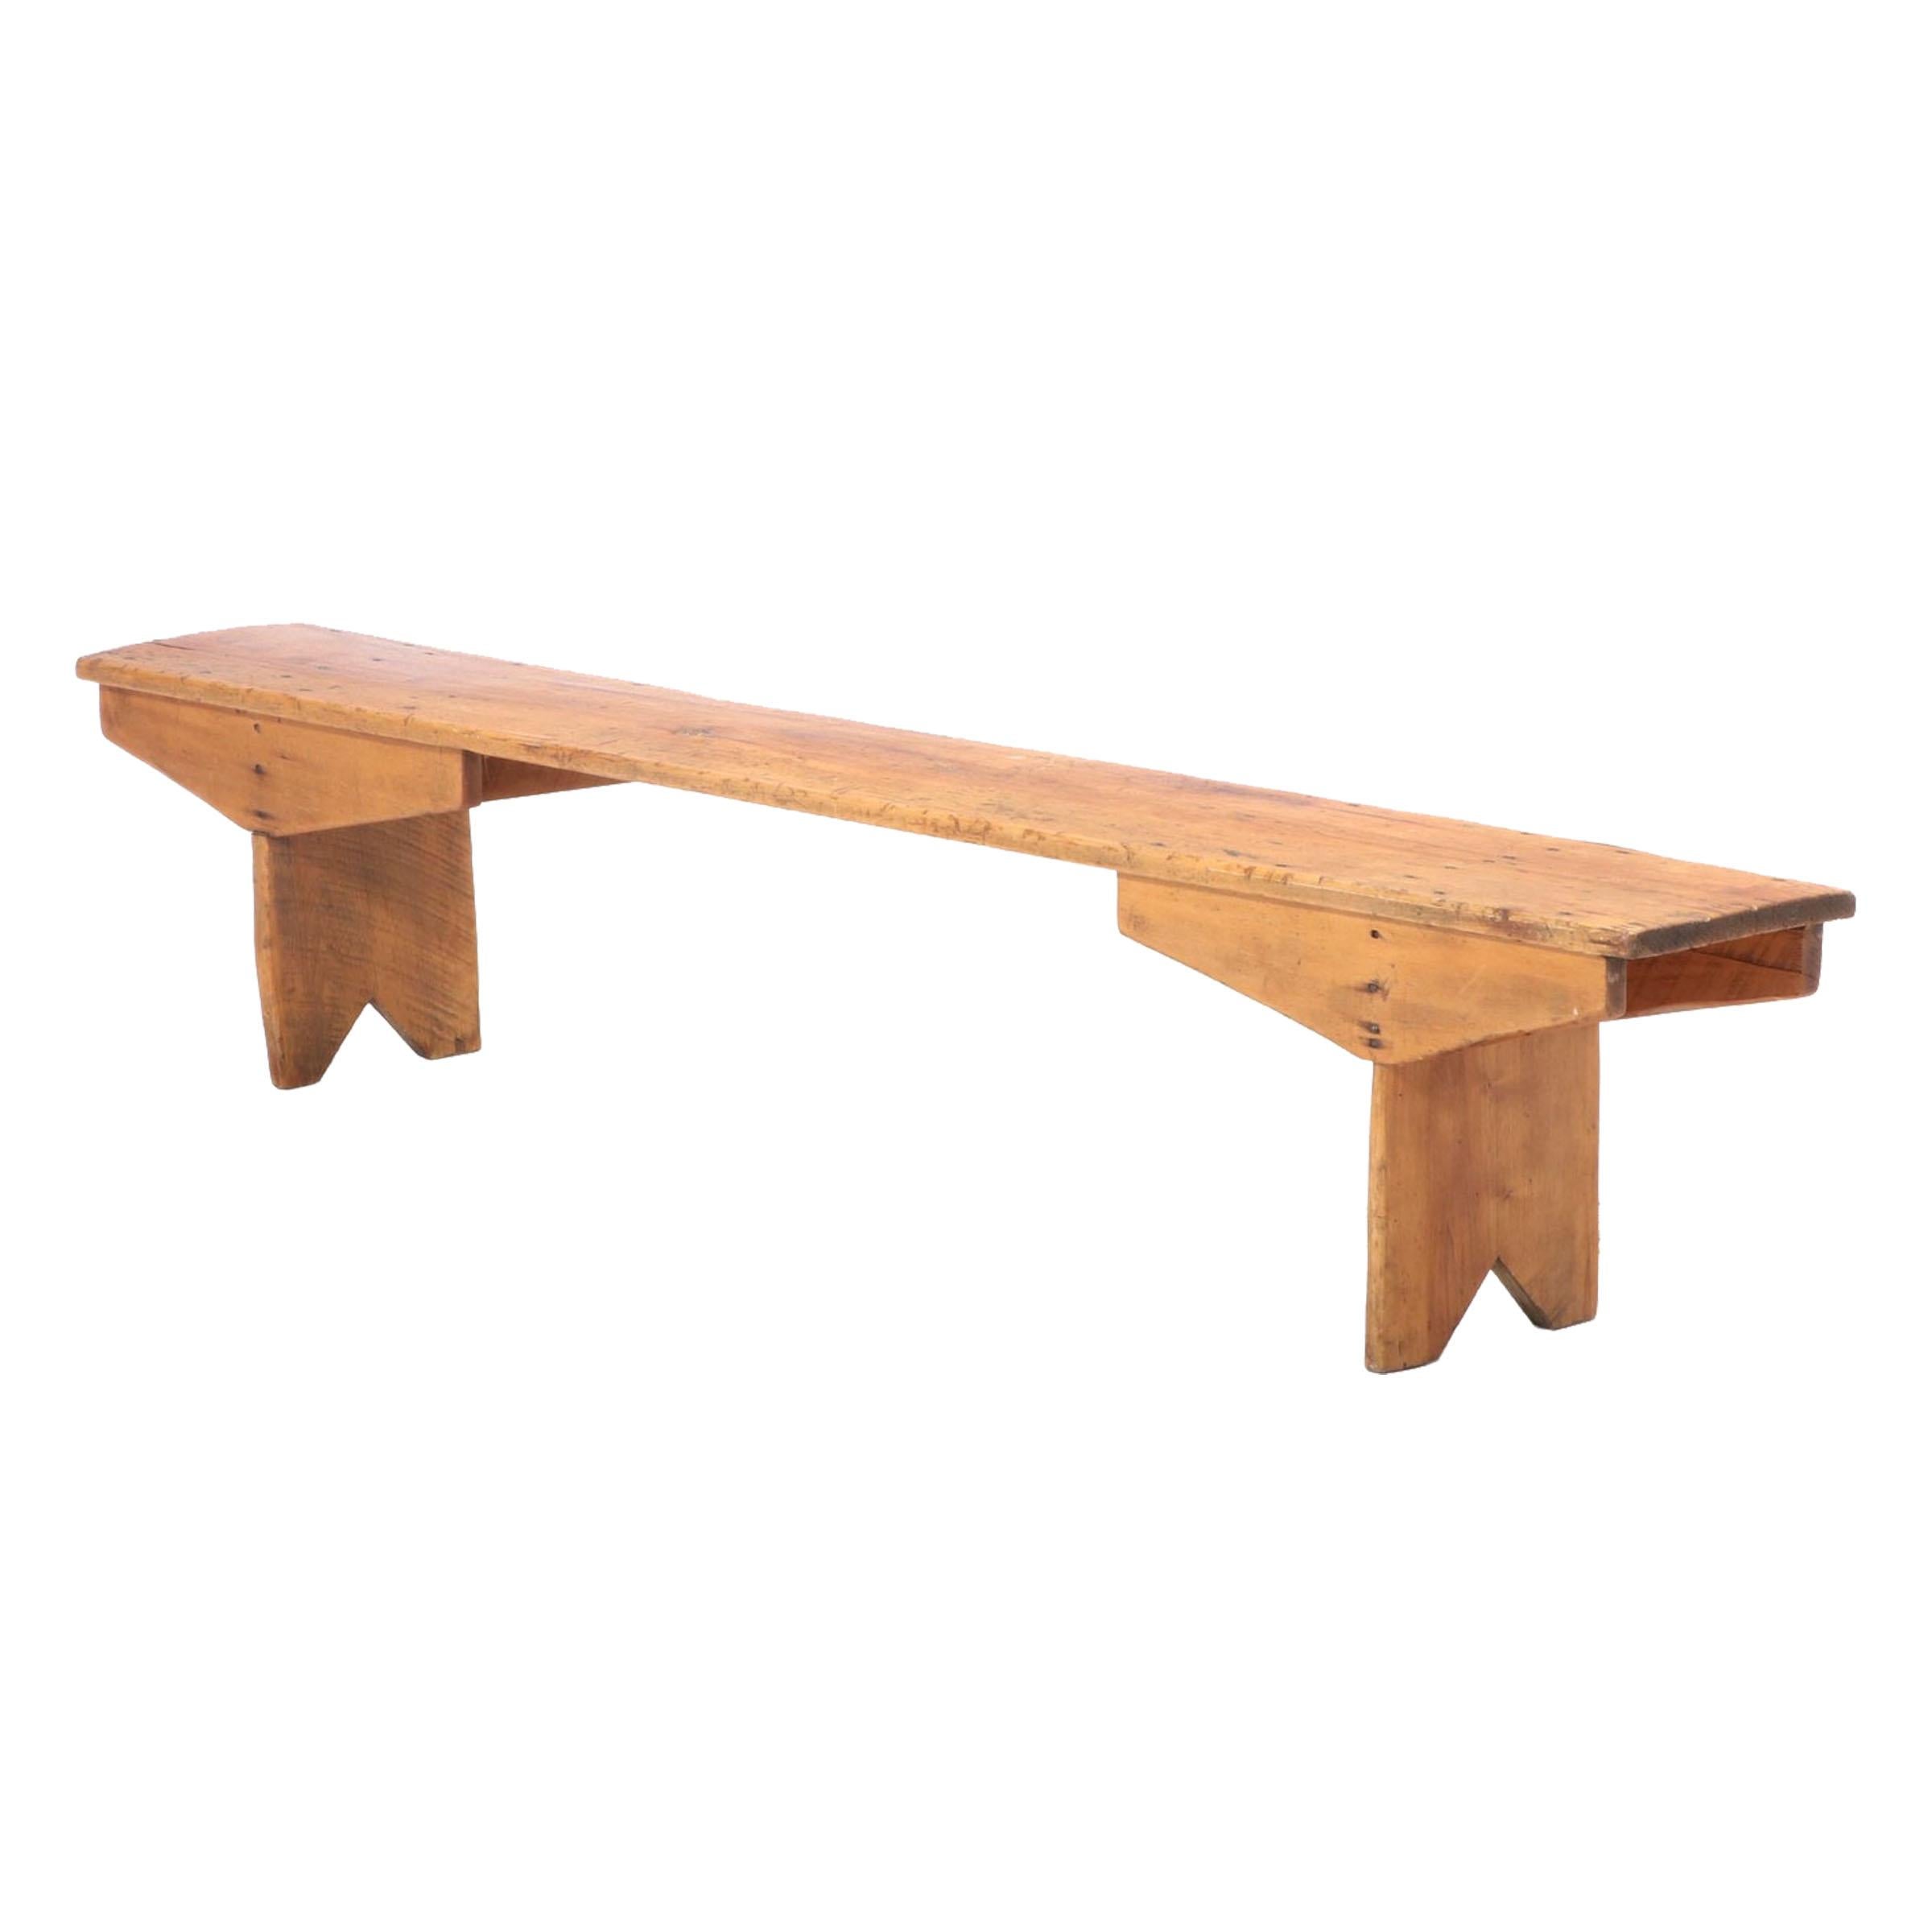 Rustic 19th Century American Pine Bench For Sale